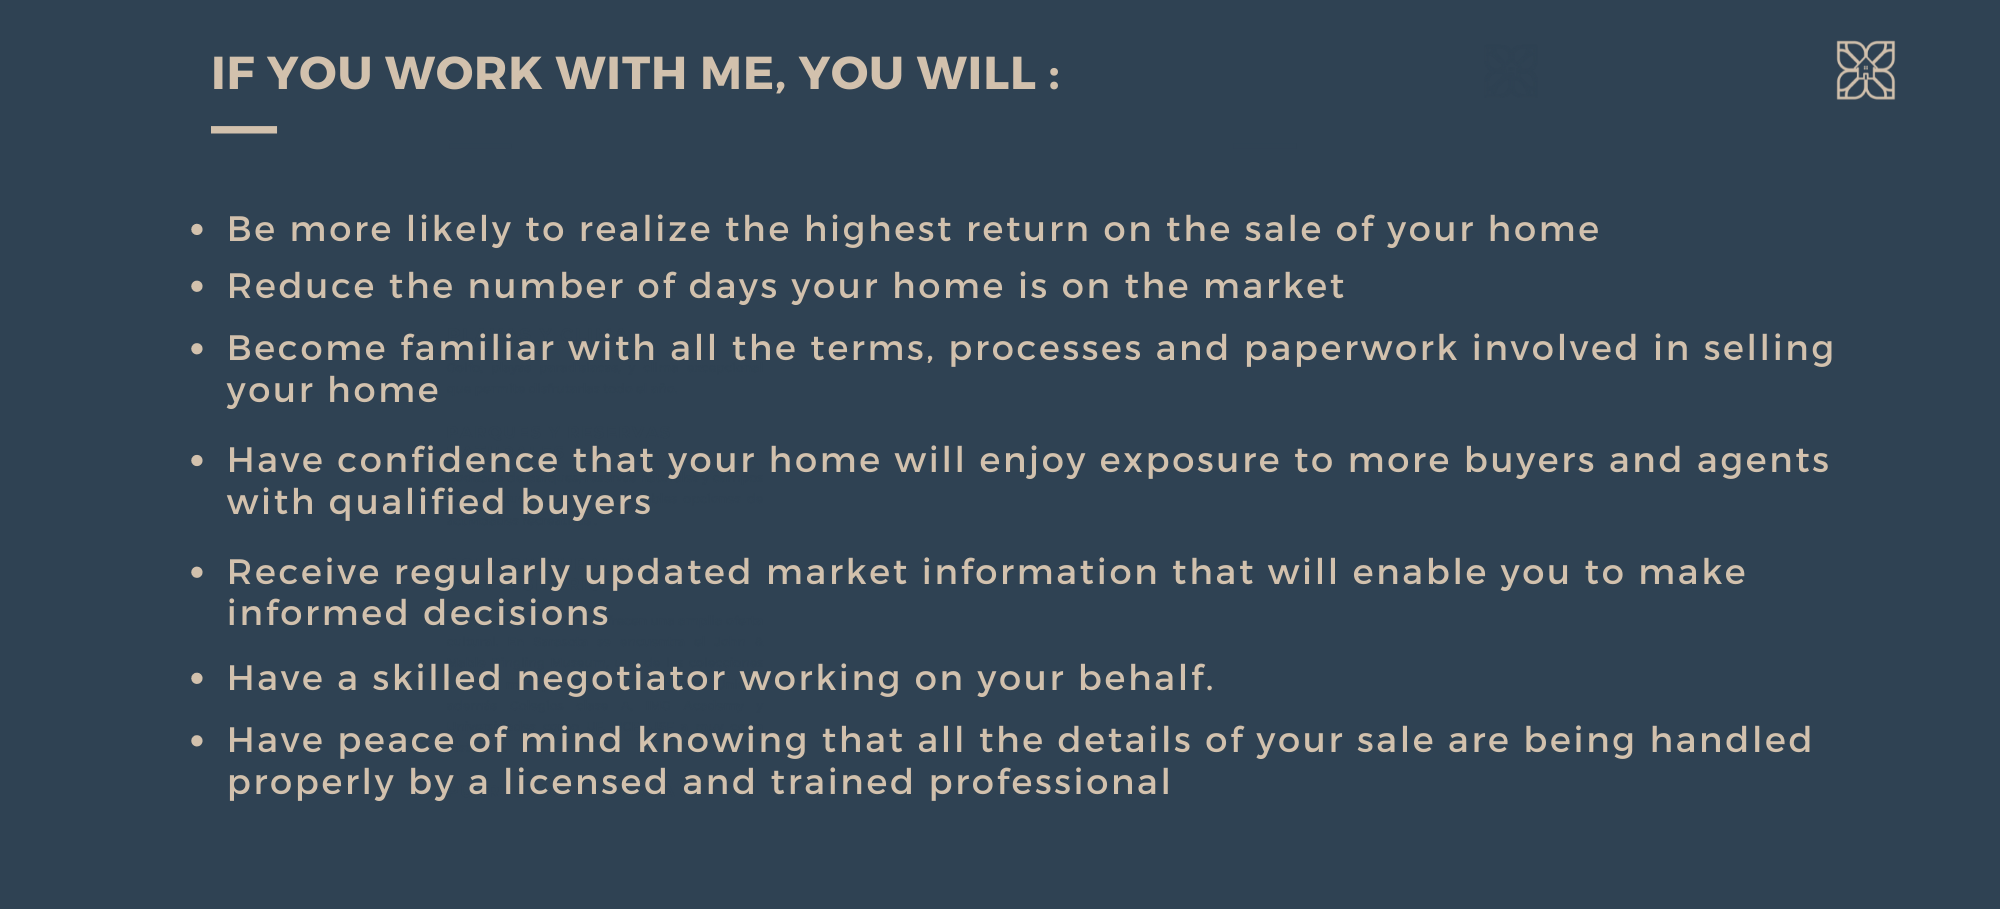 Benefits of working with a realtor